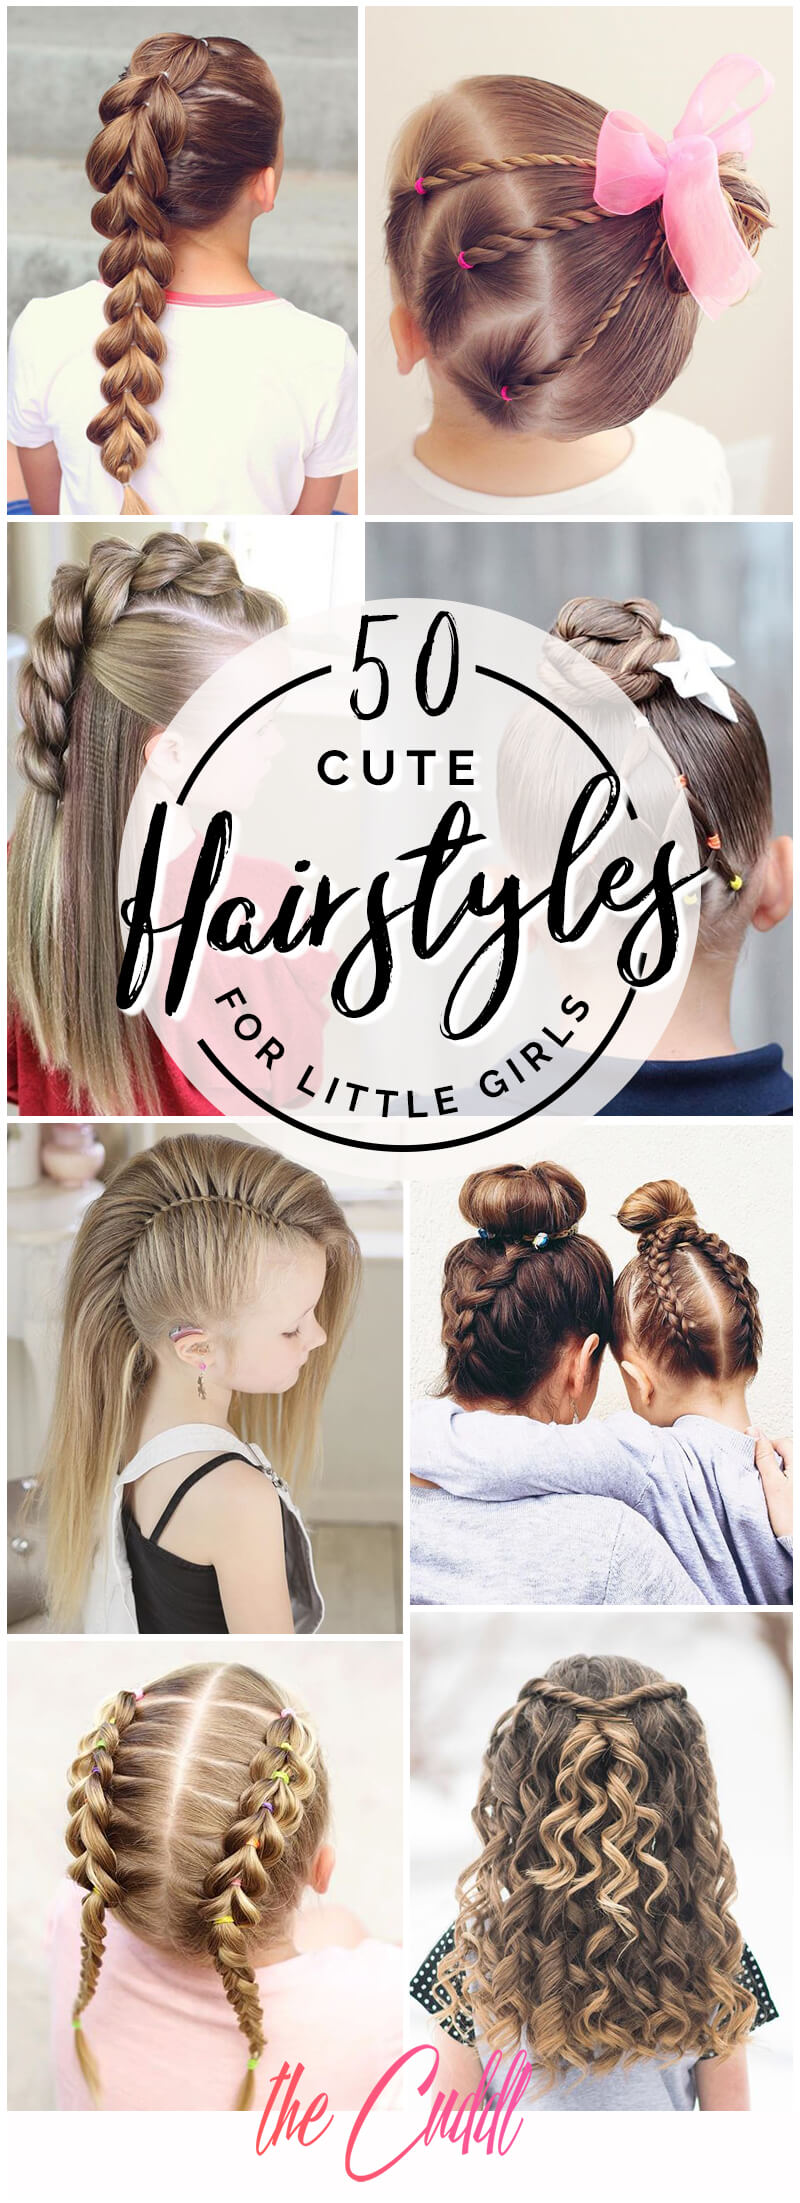 50 Pretty Perfect Cute Hairstyles for Little Girls to Show Off Their Classy Side